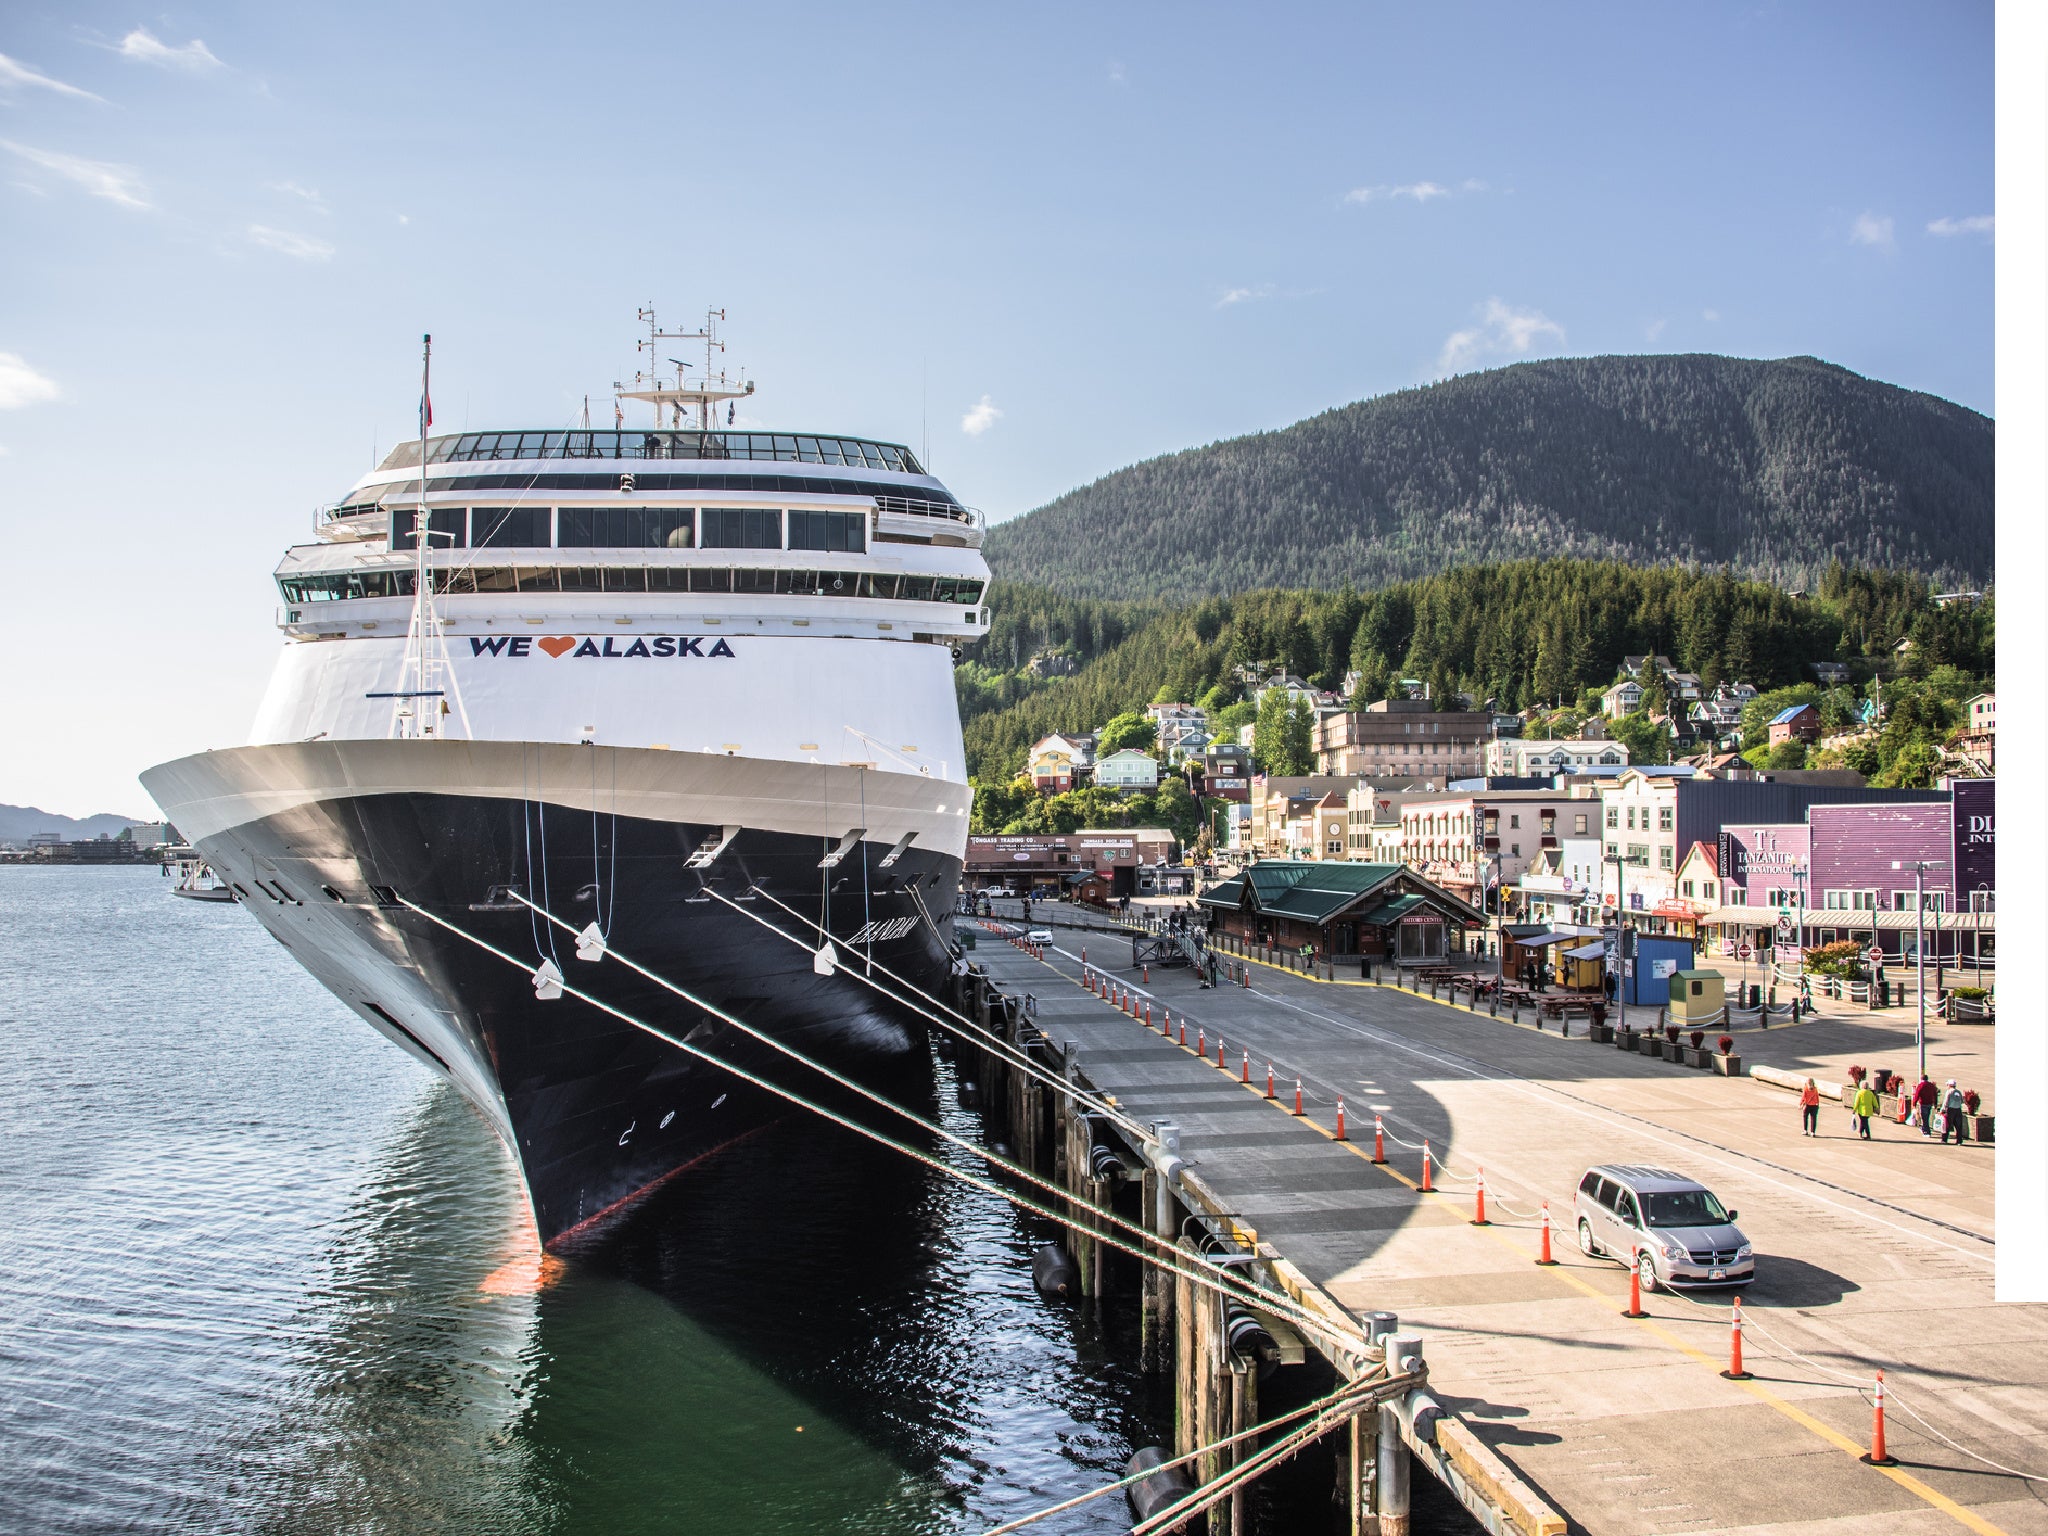 Ketchikan, Alaska, is the first stop for many cruises on their way to more northern climes